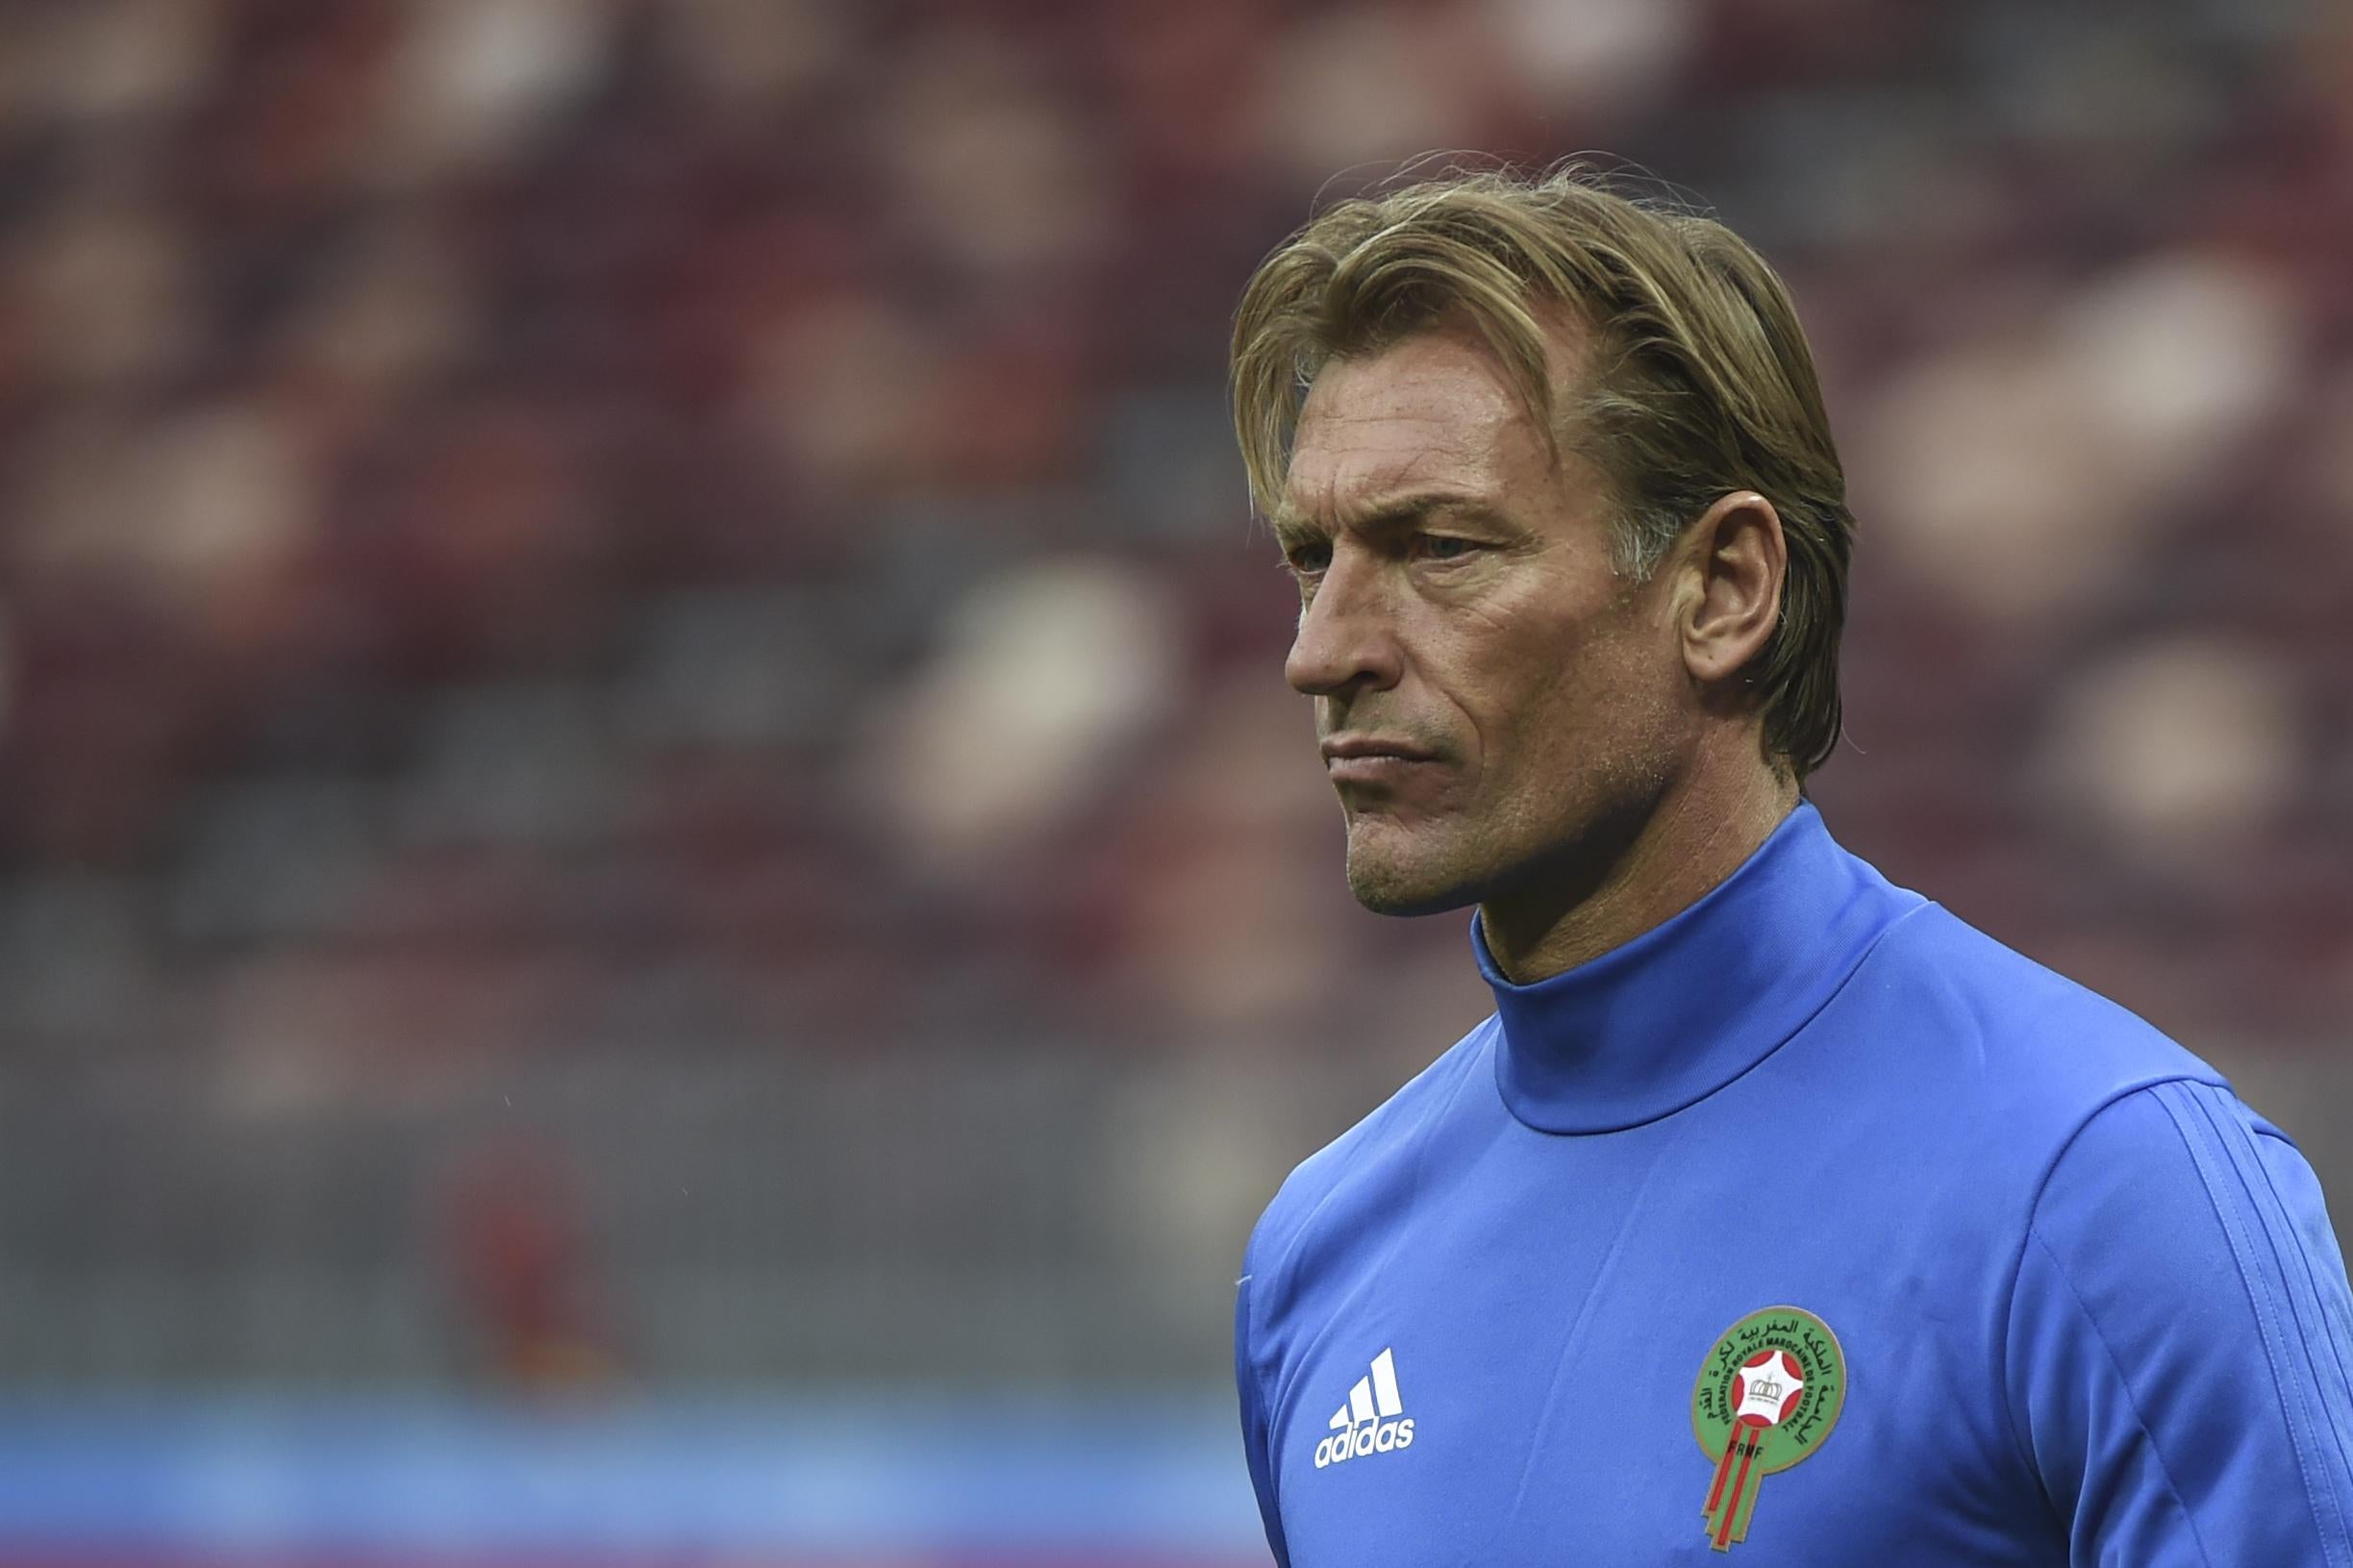 Herve Renard, Morocco's World Cup coach, needs a new gig. What should he do  next.